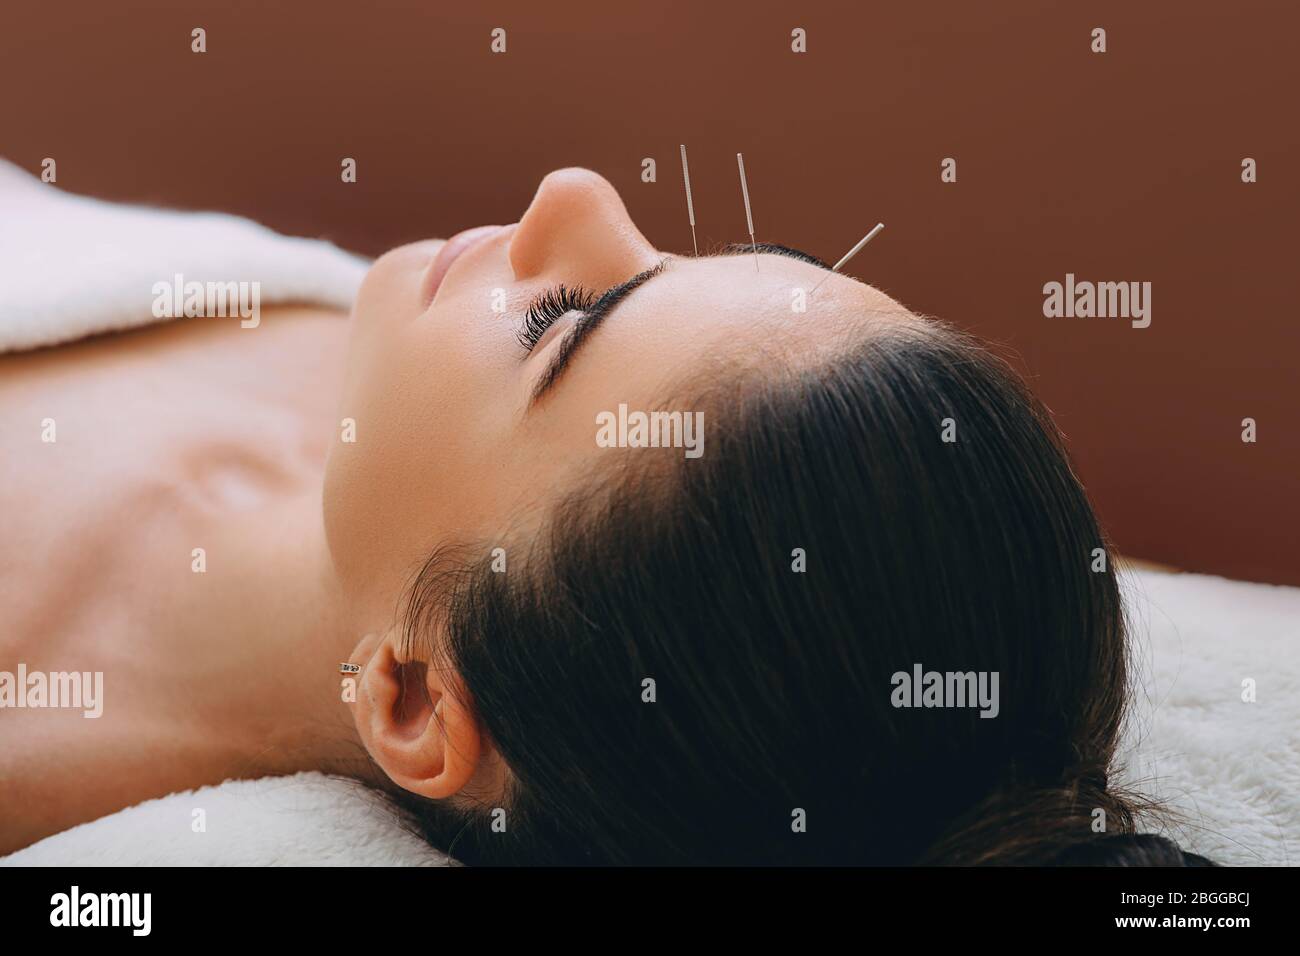 Beautiful woman received an acupuncture procedure in a spa salon. Acupuncture in the face and forehead. Acupuncture needles close-up on a brown backgr Stock Photo